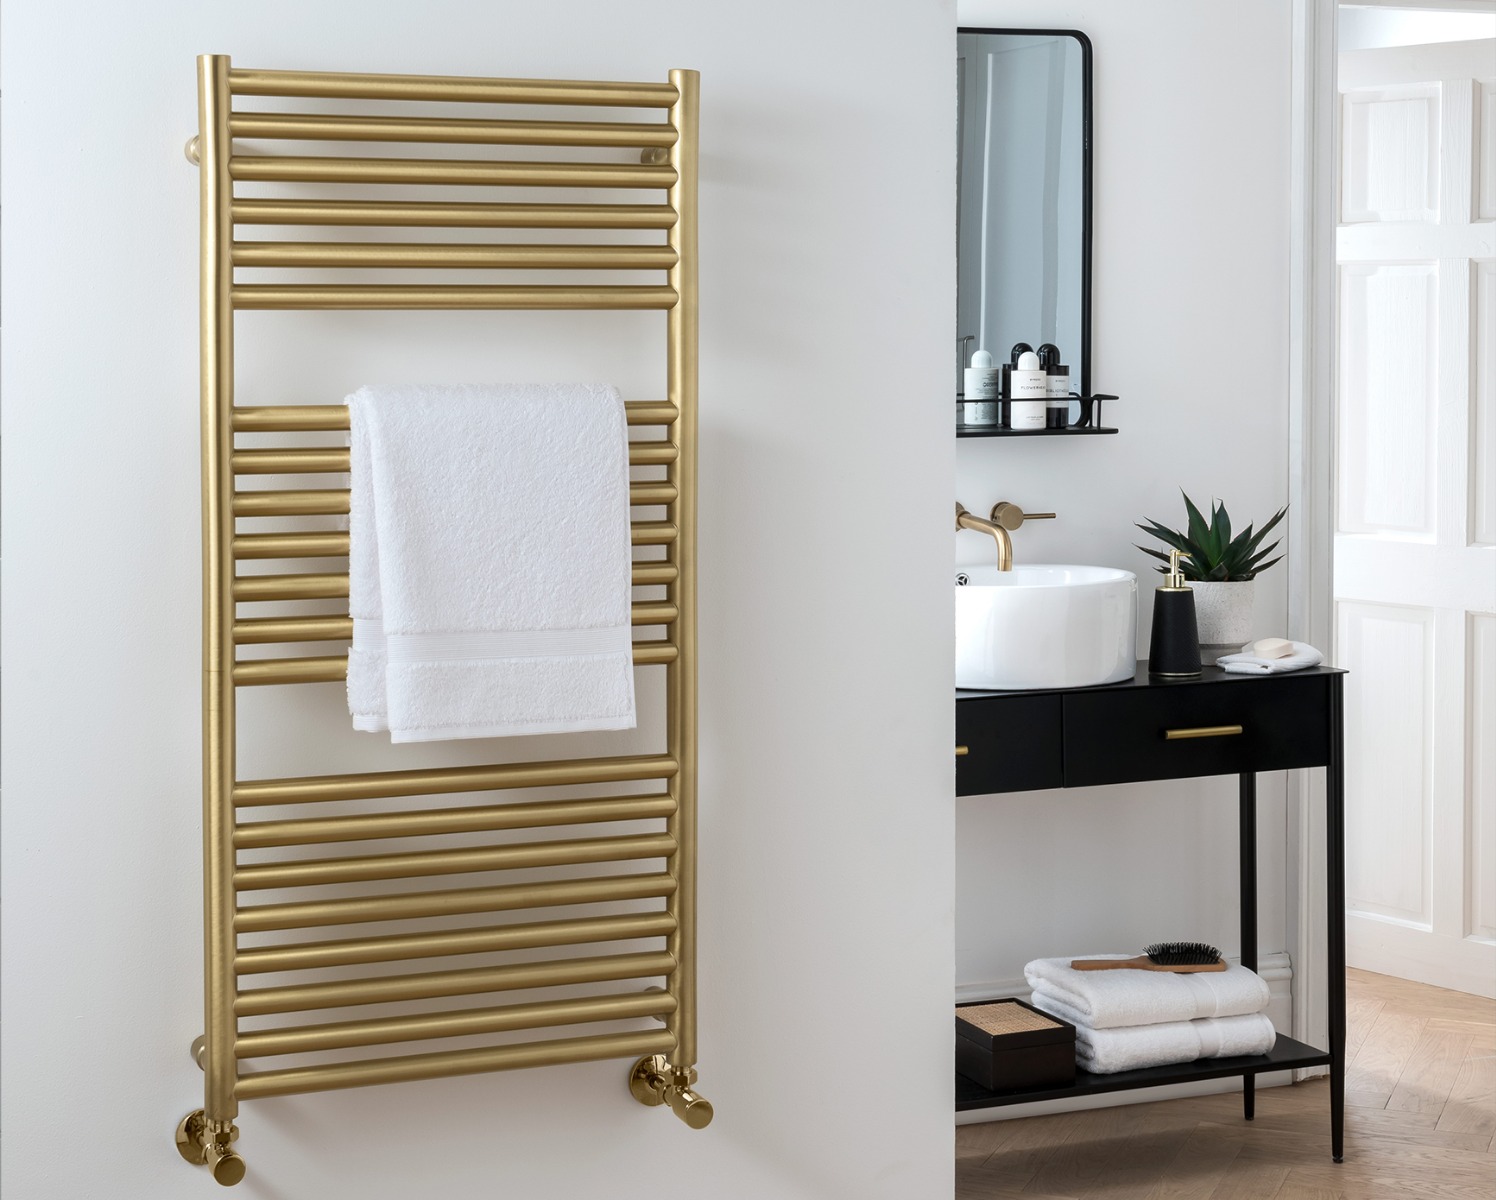 Ladder Rails Studio Heating Only Non-lacquered - Brushed Brass 1000x500